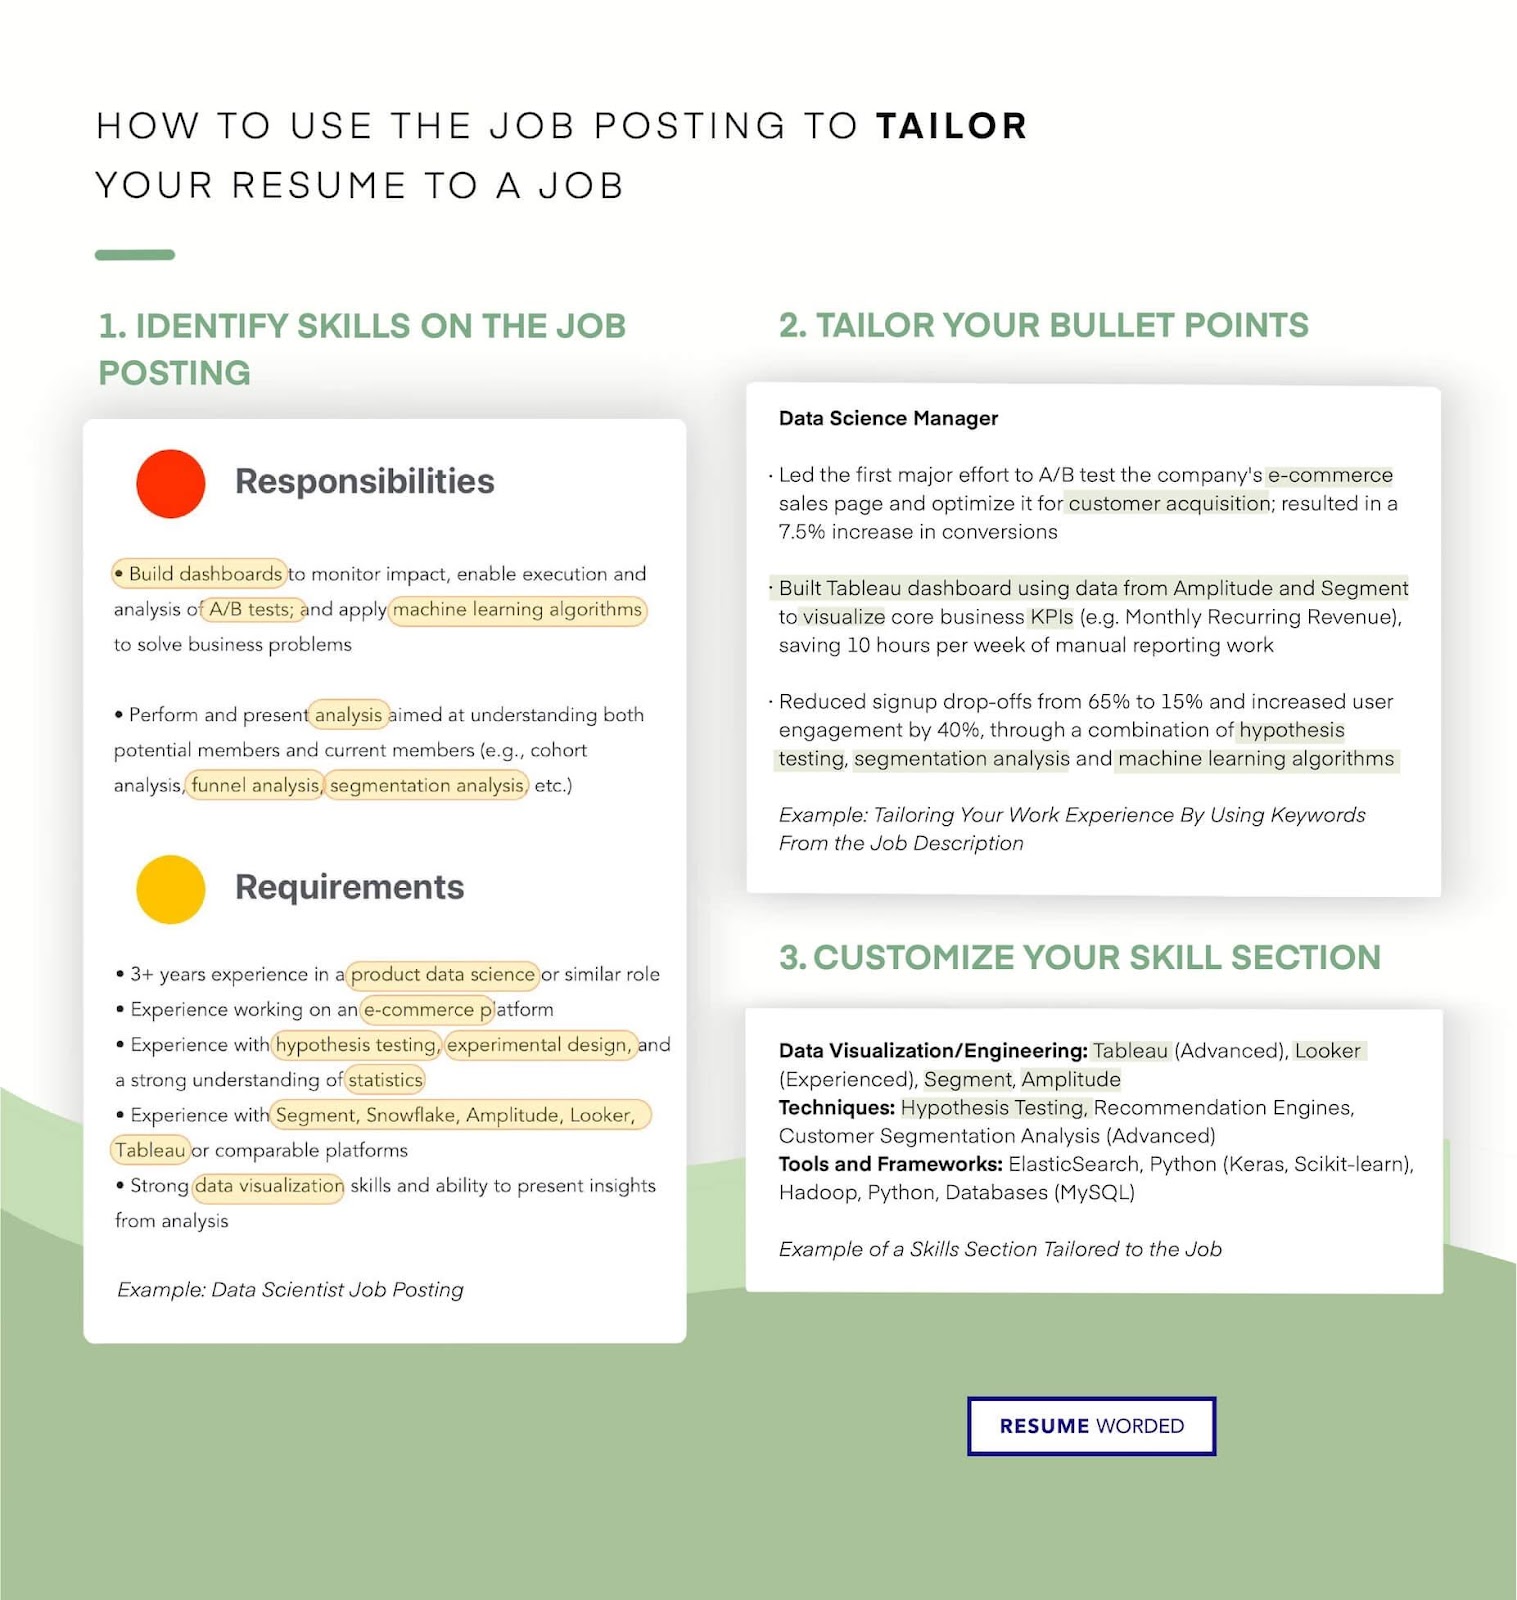 Example showing how you can tailor core competencies as per the job